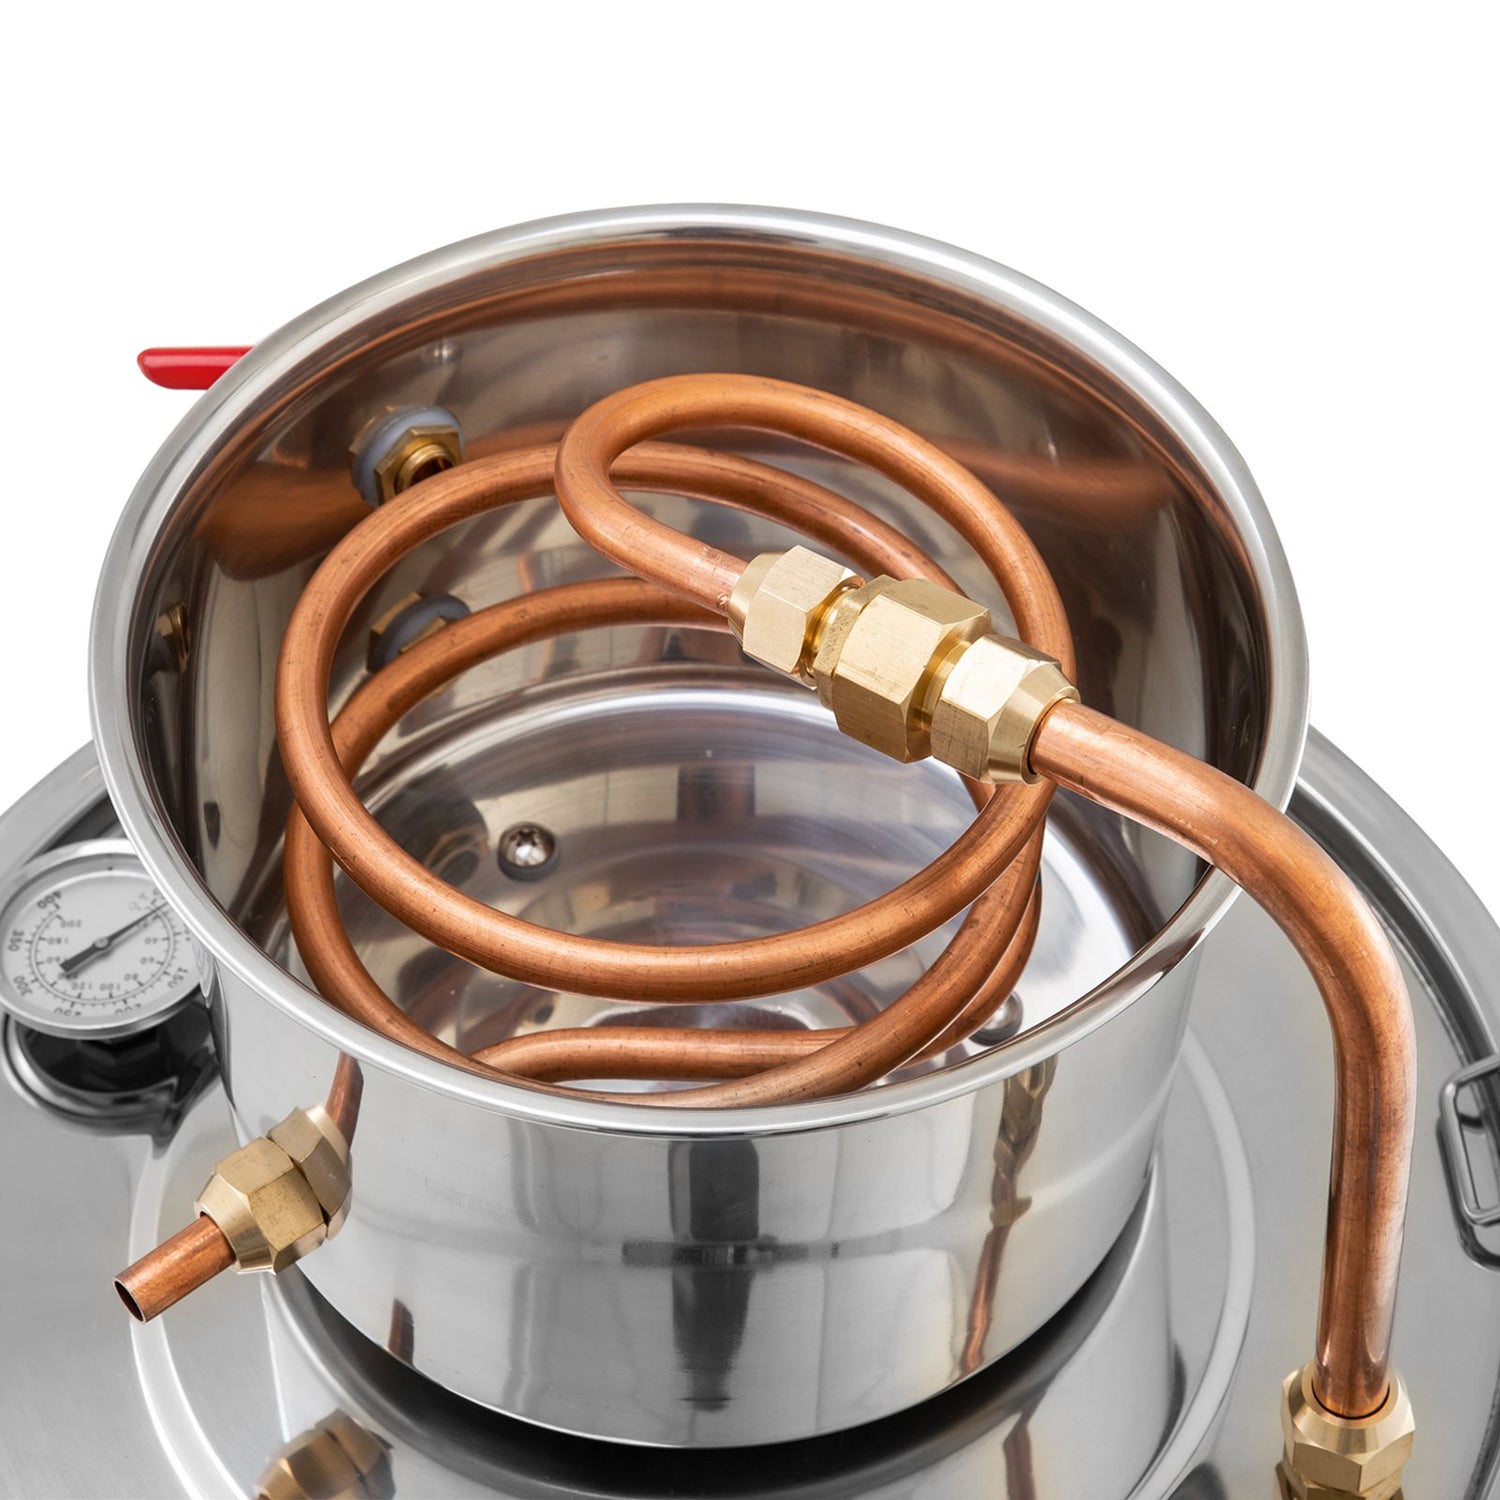 A-FCSA2-10 Alcohol Wine Distiller | 2.5 Gallon 10L | Moonshine Still with Copper Pipe | Stainless Steel